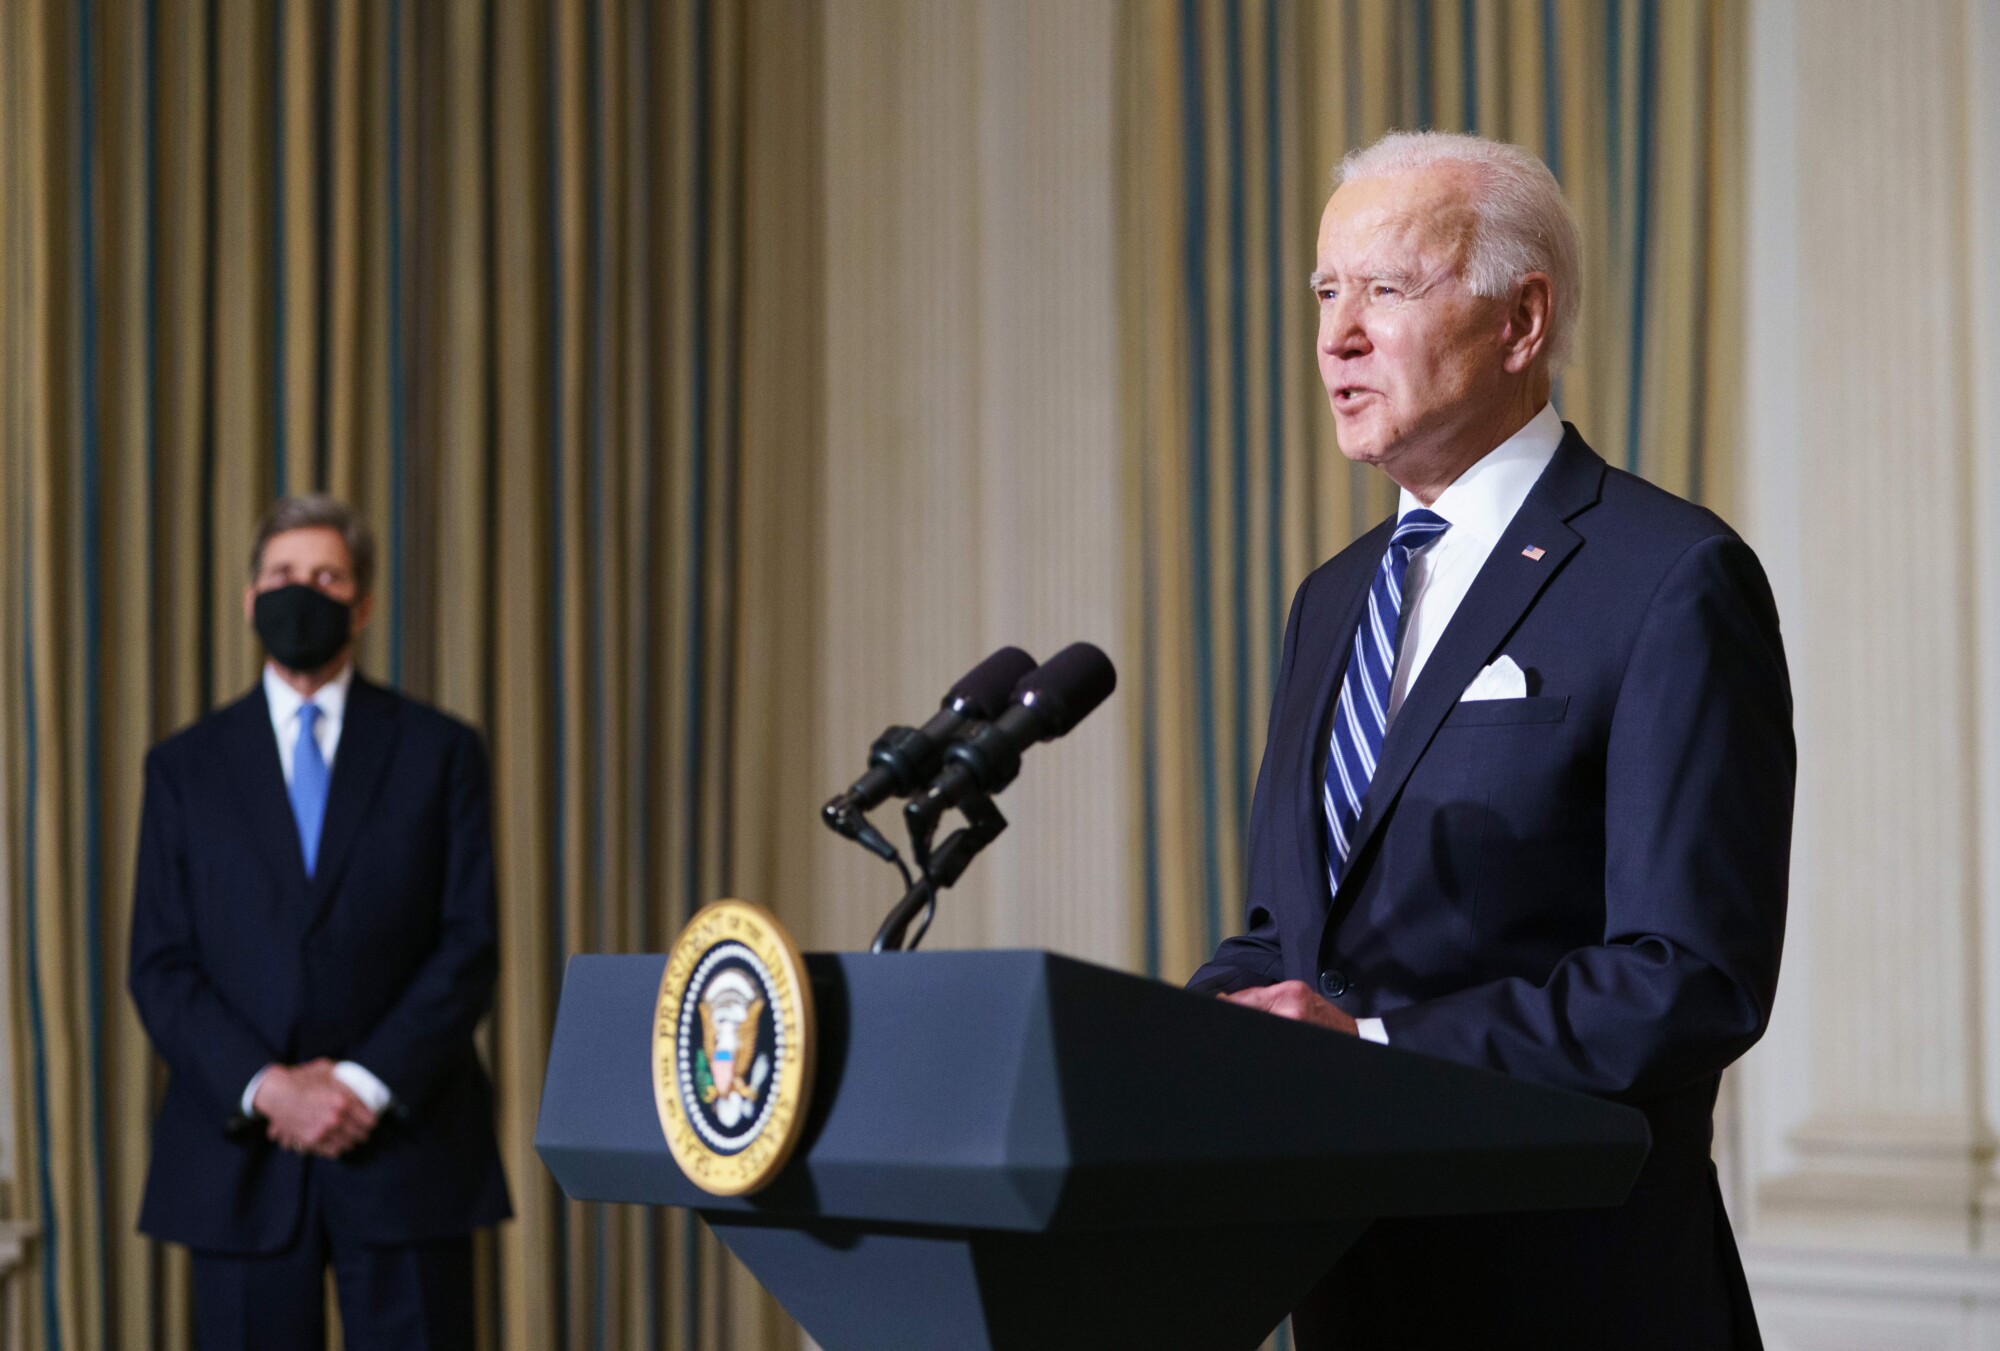 Biden Announces Sweeping Policy Changes to Combat ‘Climate Crisis’